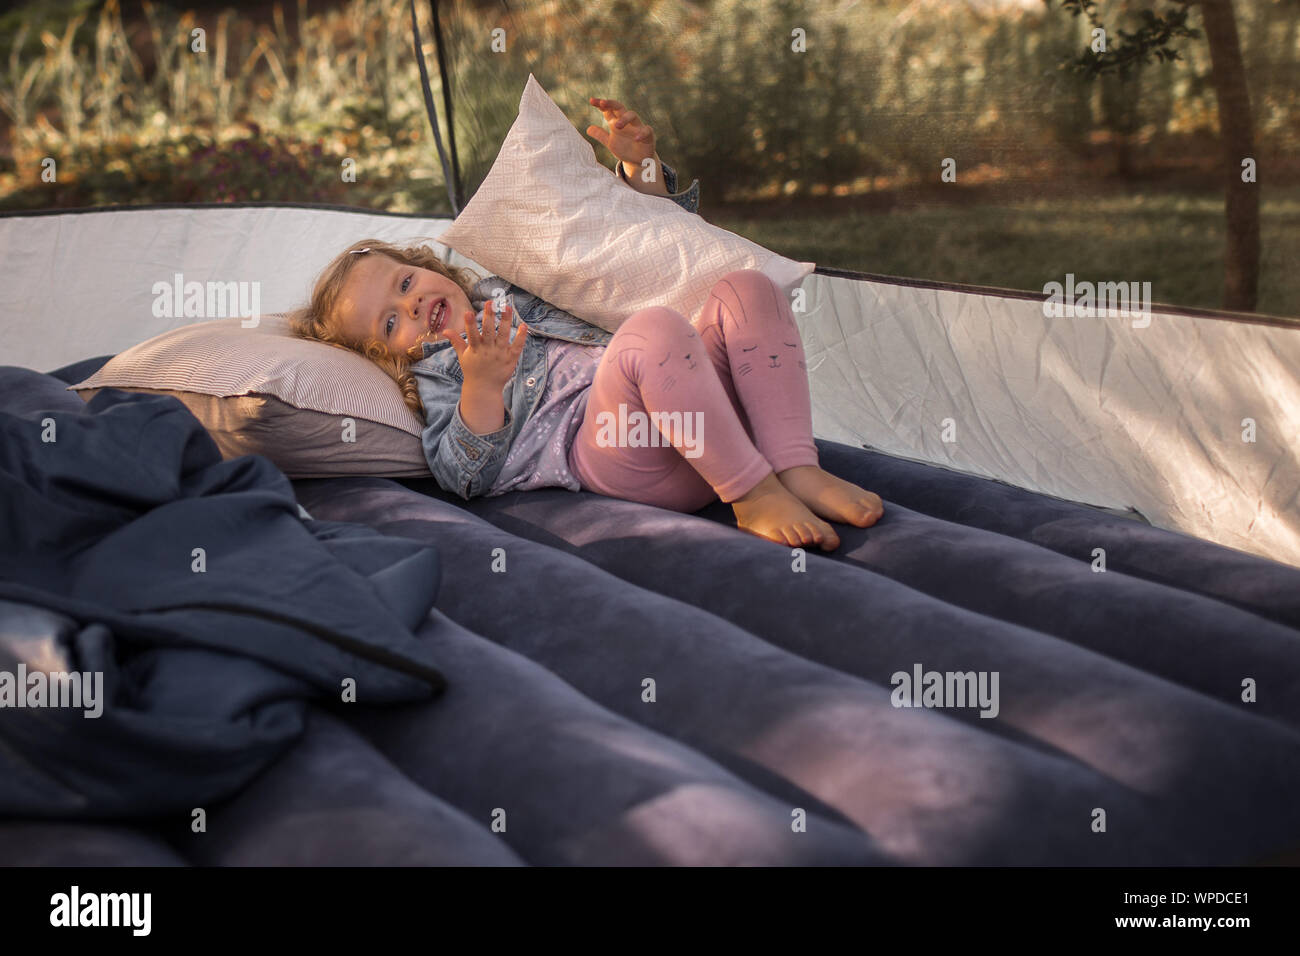 Little, happy preschooler girl, lying on air mattress in tent, on a camping trip Stock Photo